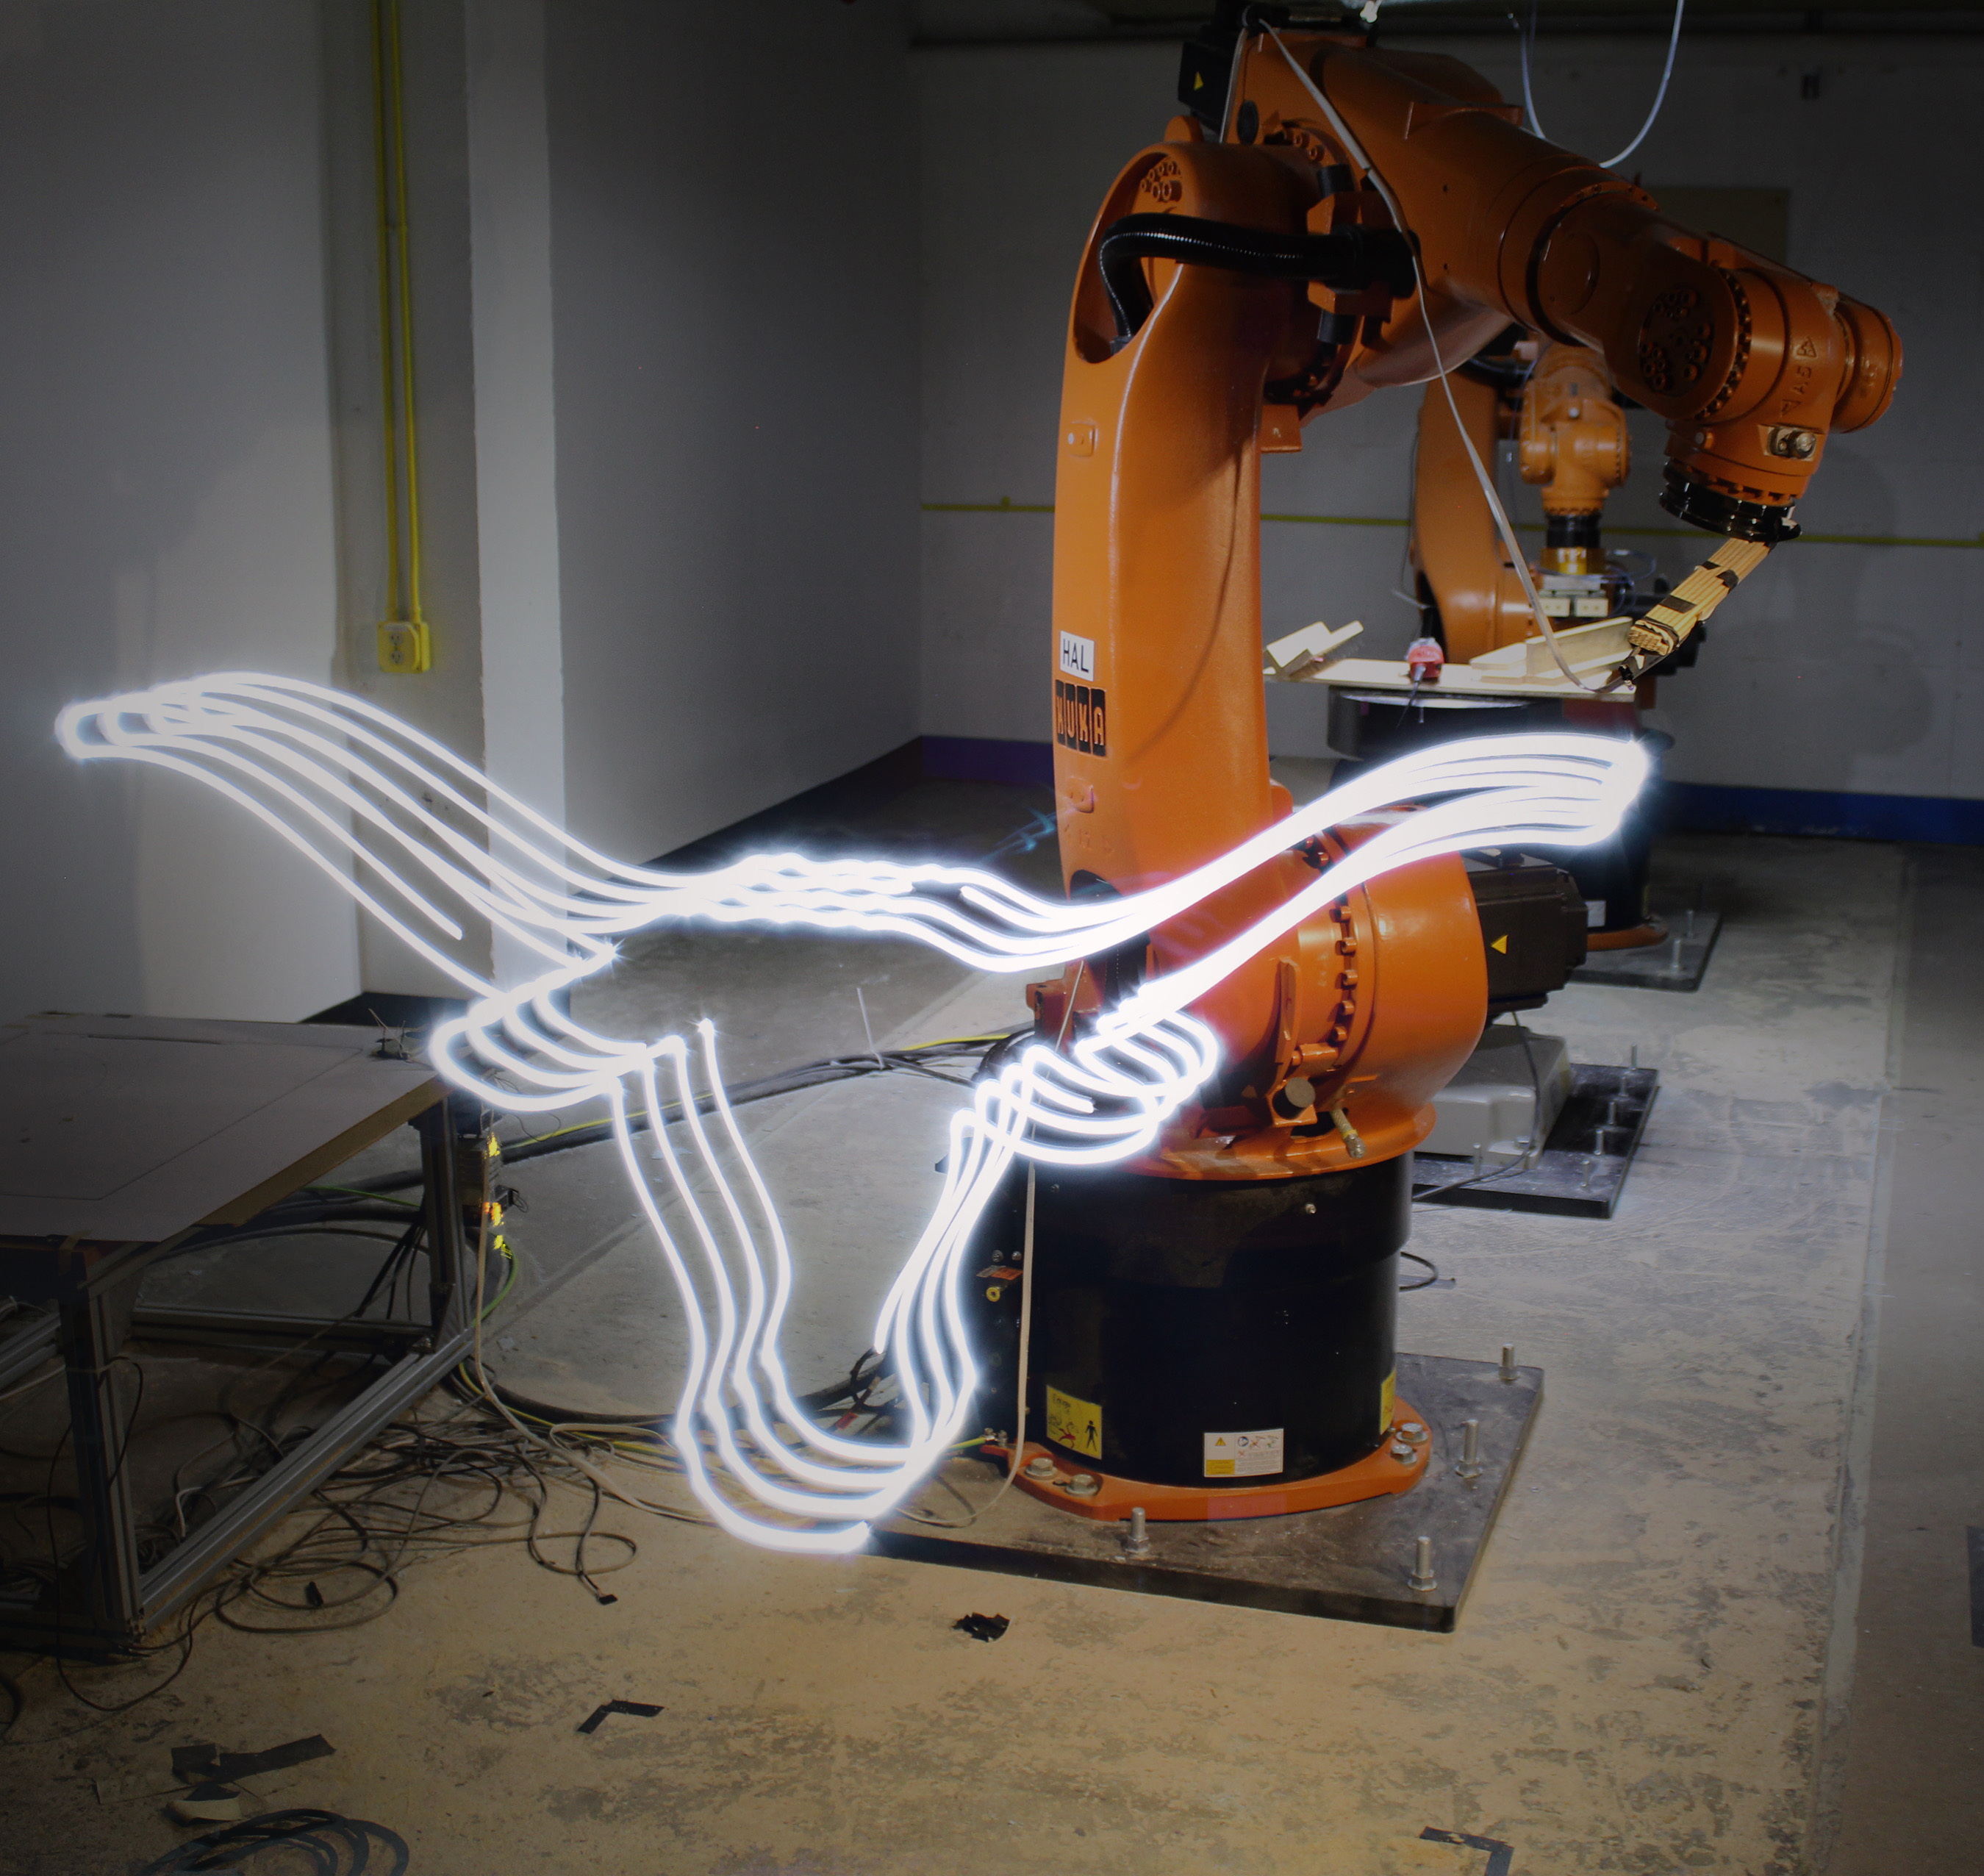 The longhorn symbol shown in front of a KUKA robotic arm